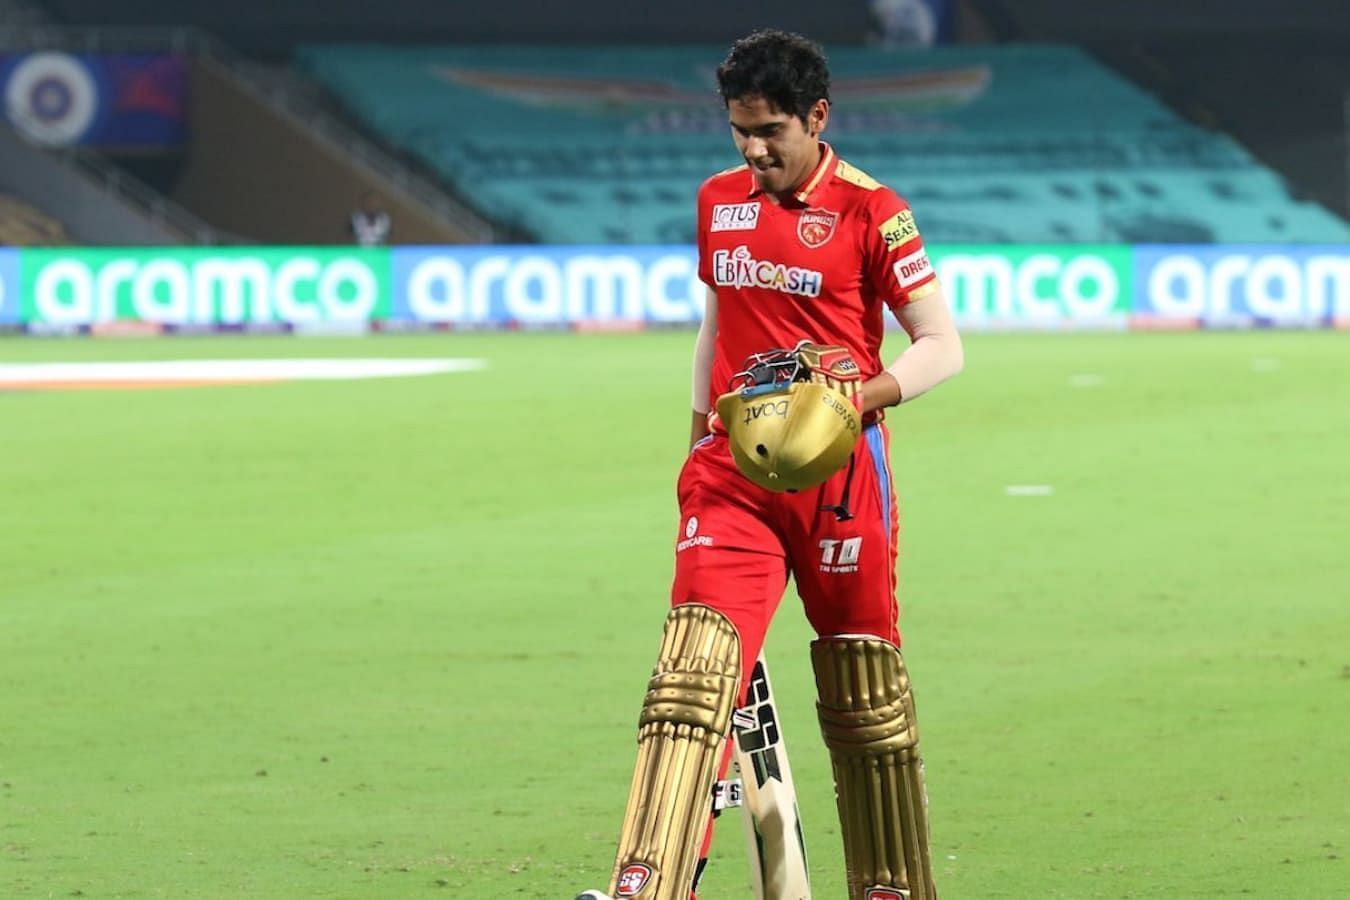 Raj Angad Bawa had been ruled out of IPL 2023 due to injury.